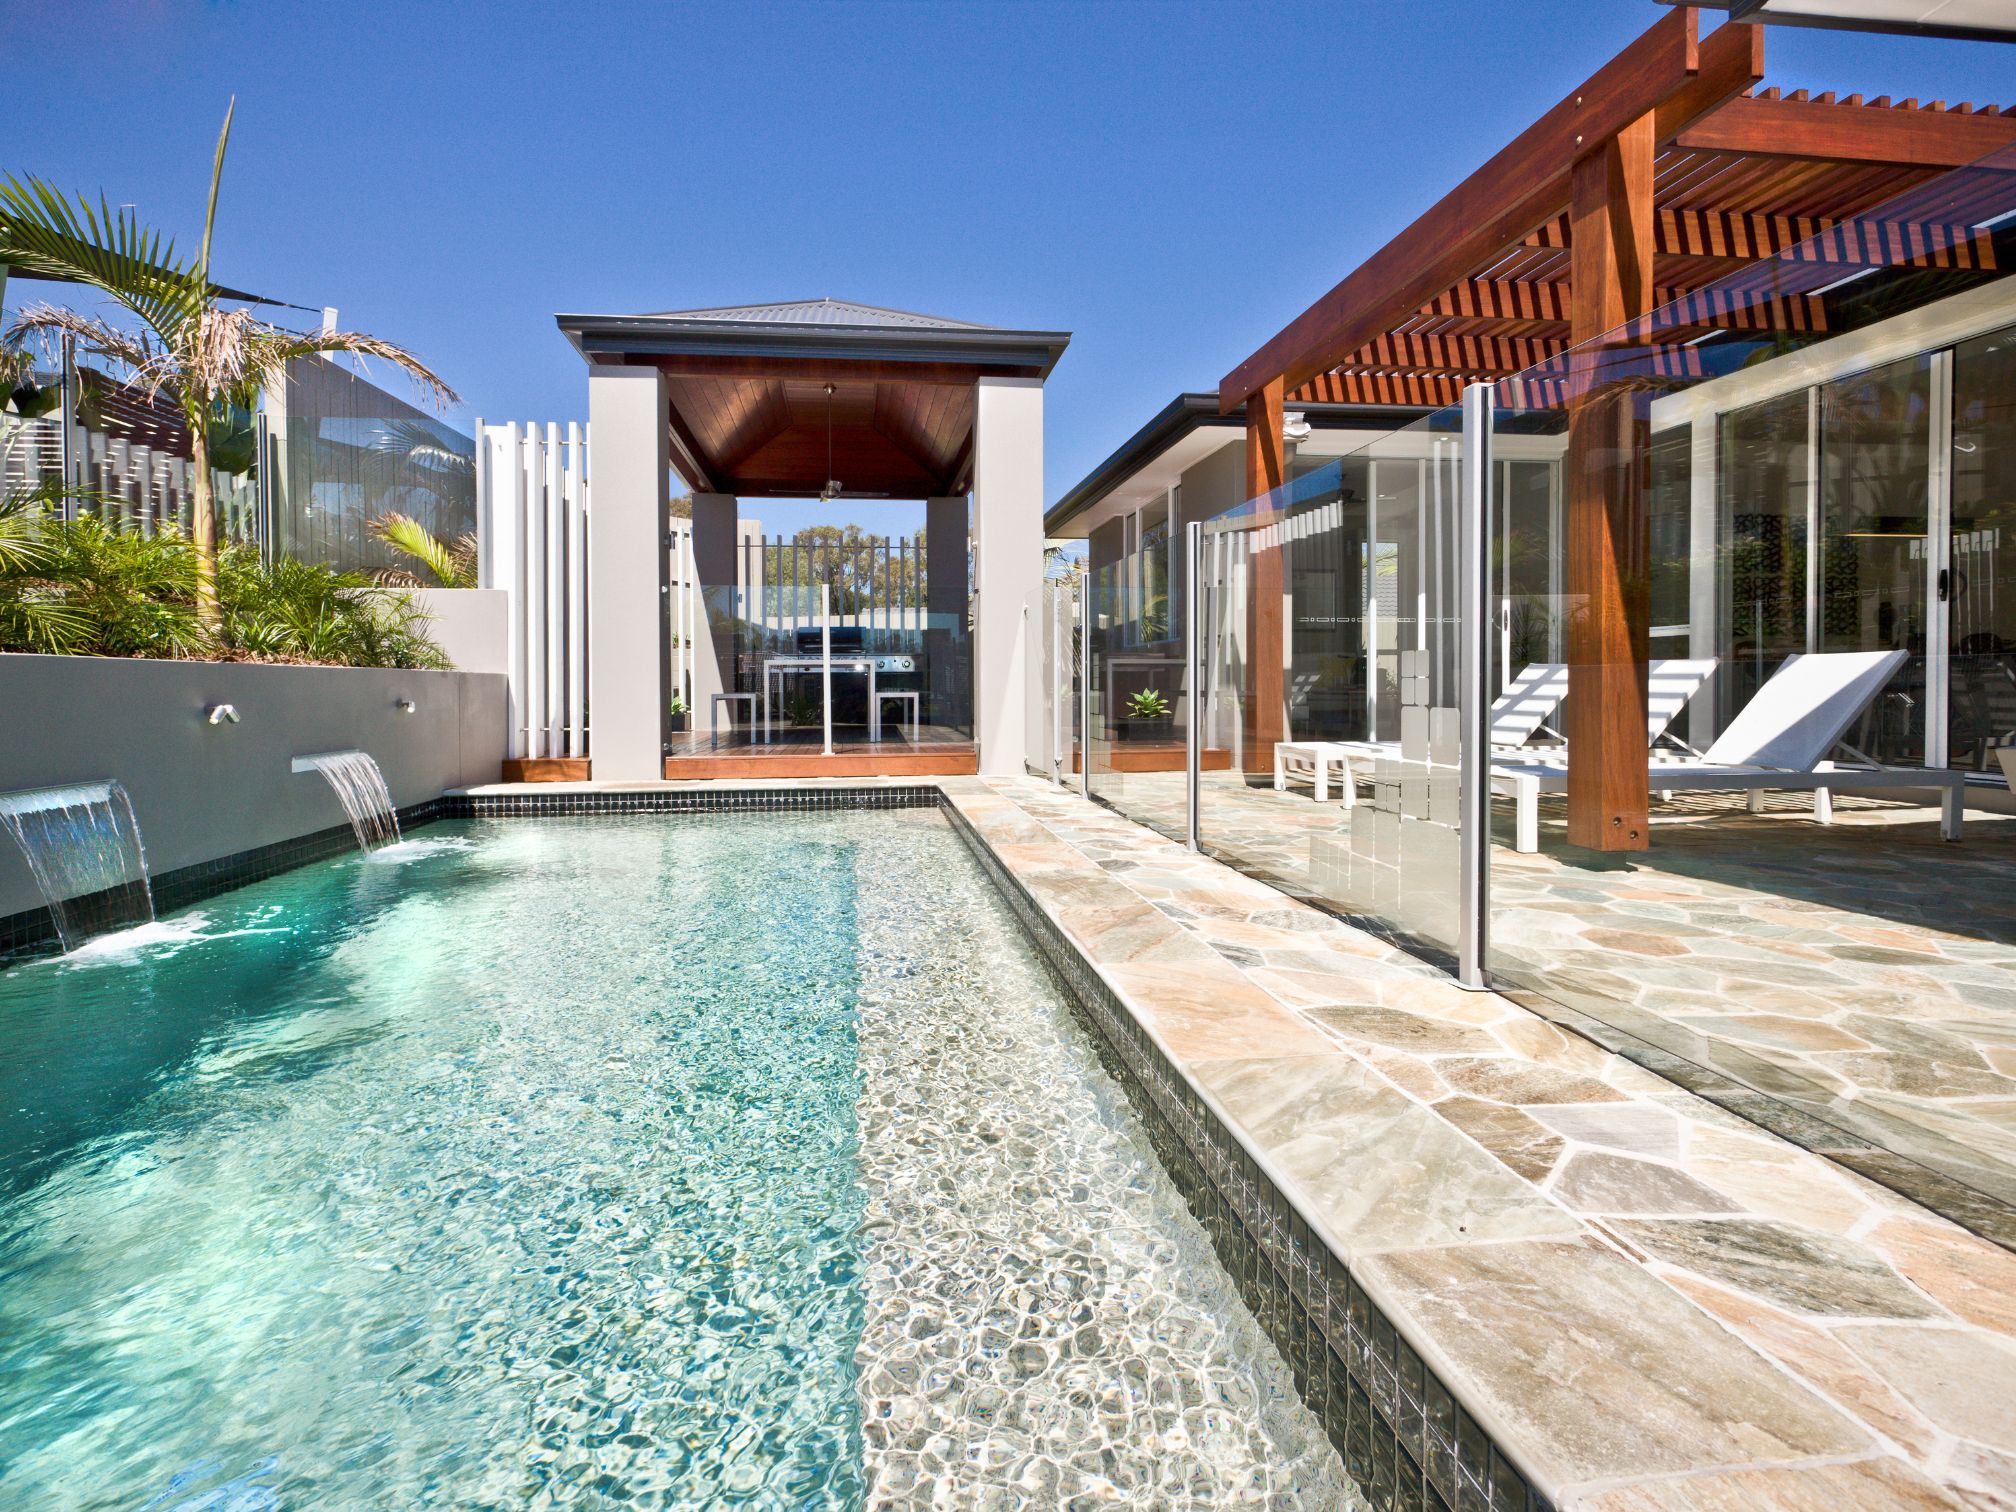 How to Clean Glass Pool Perth